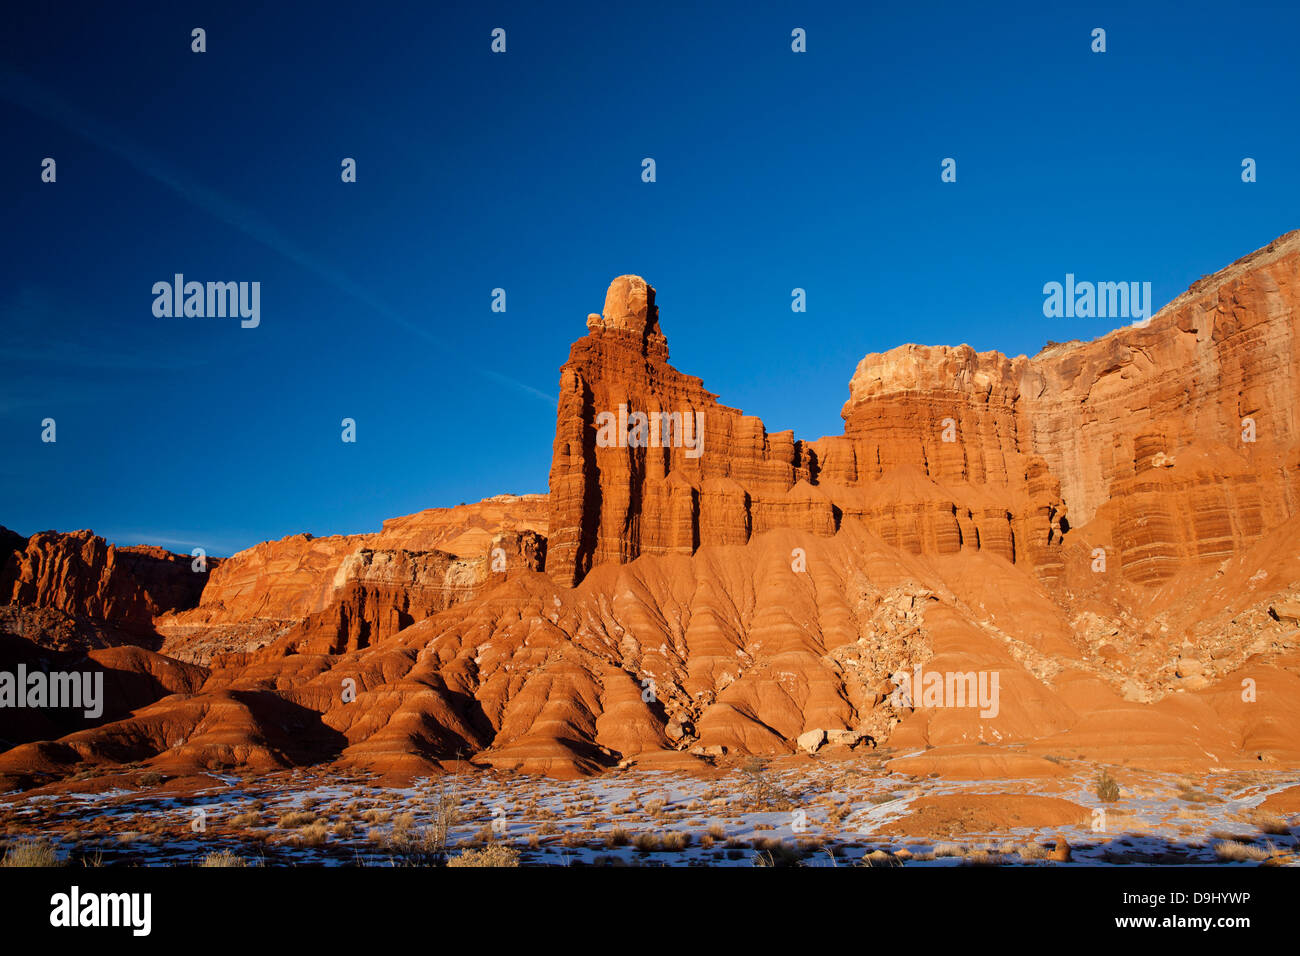 Chimney Rock sandstone pillar rock formation late afternoon, Capitol Reef National Park, Utah, United States of America Stock Photo